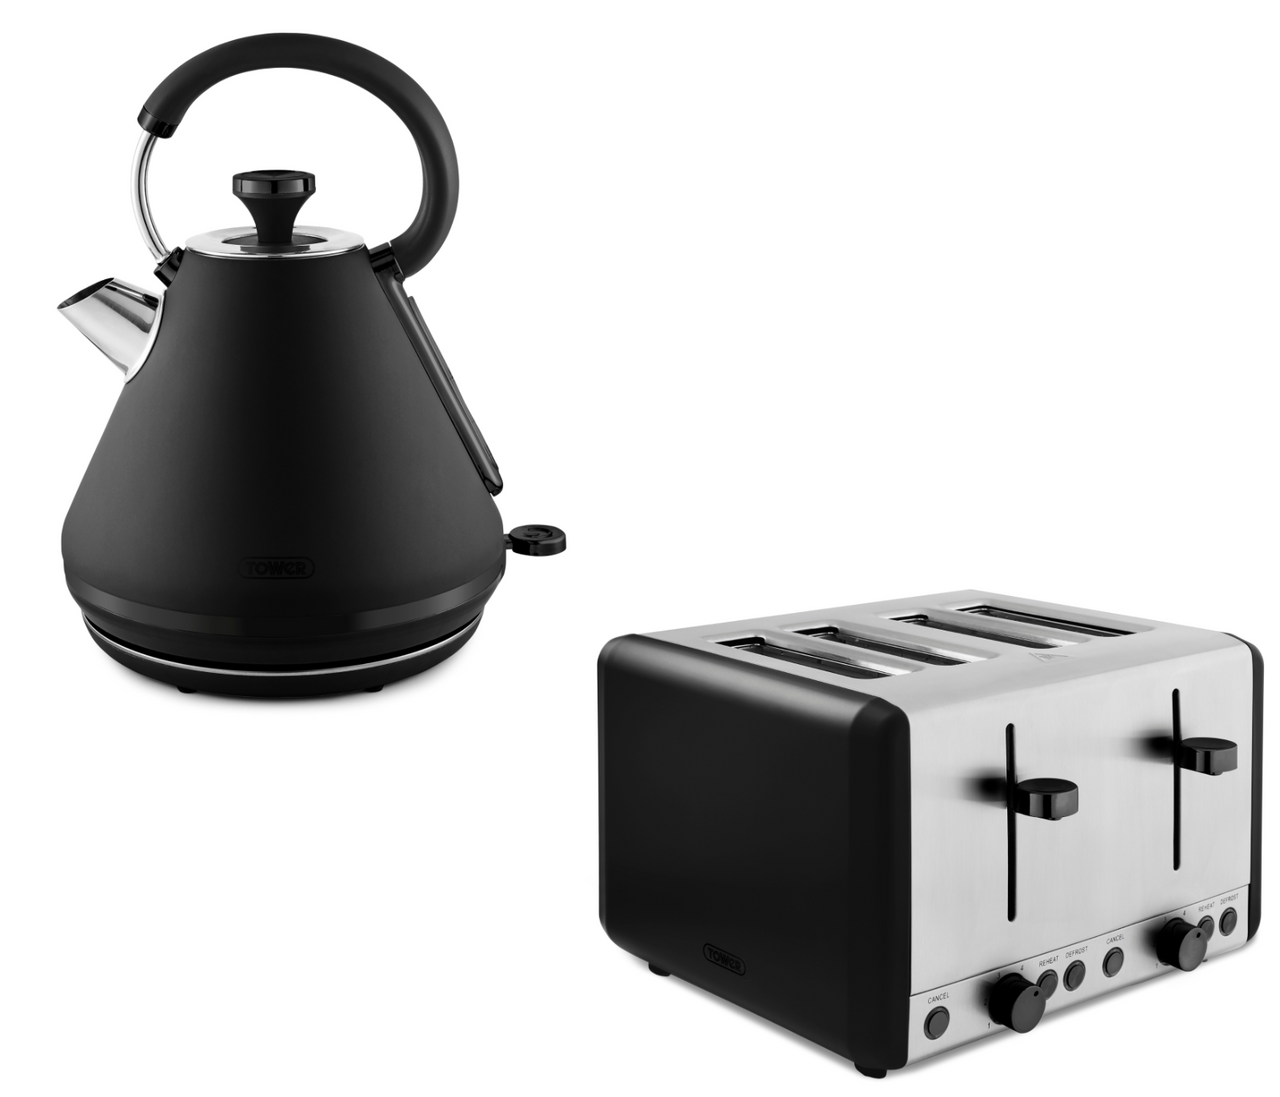 Tower Sera Pyramid Kettle & 4 Slice Toaster Set in Black with Smoked Black Trim